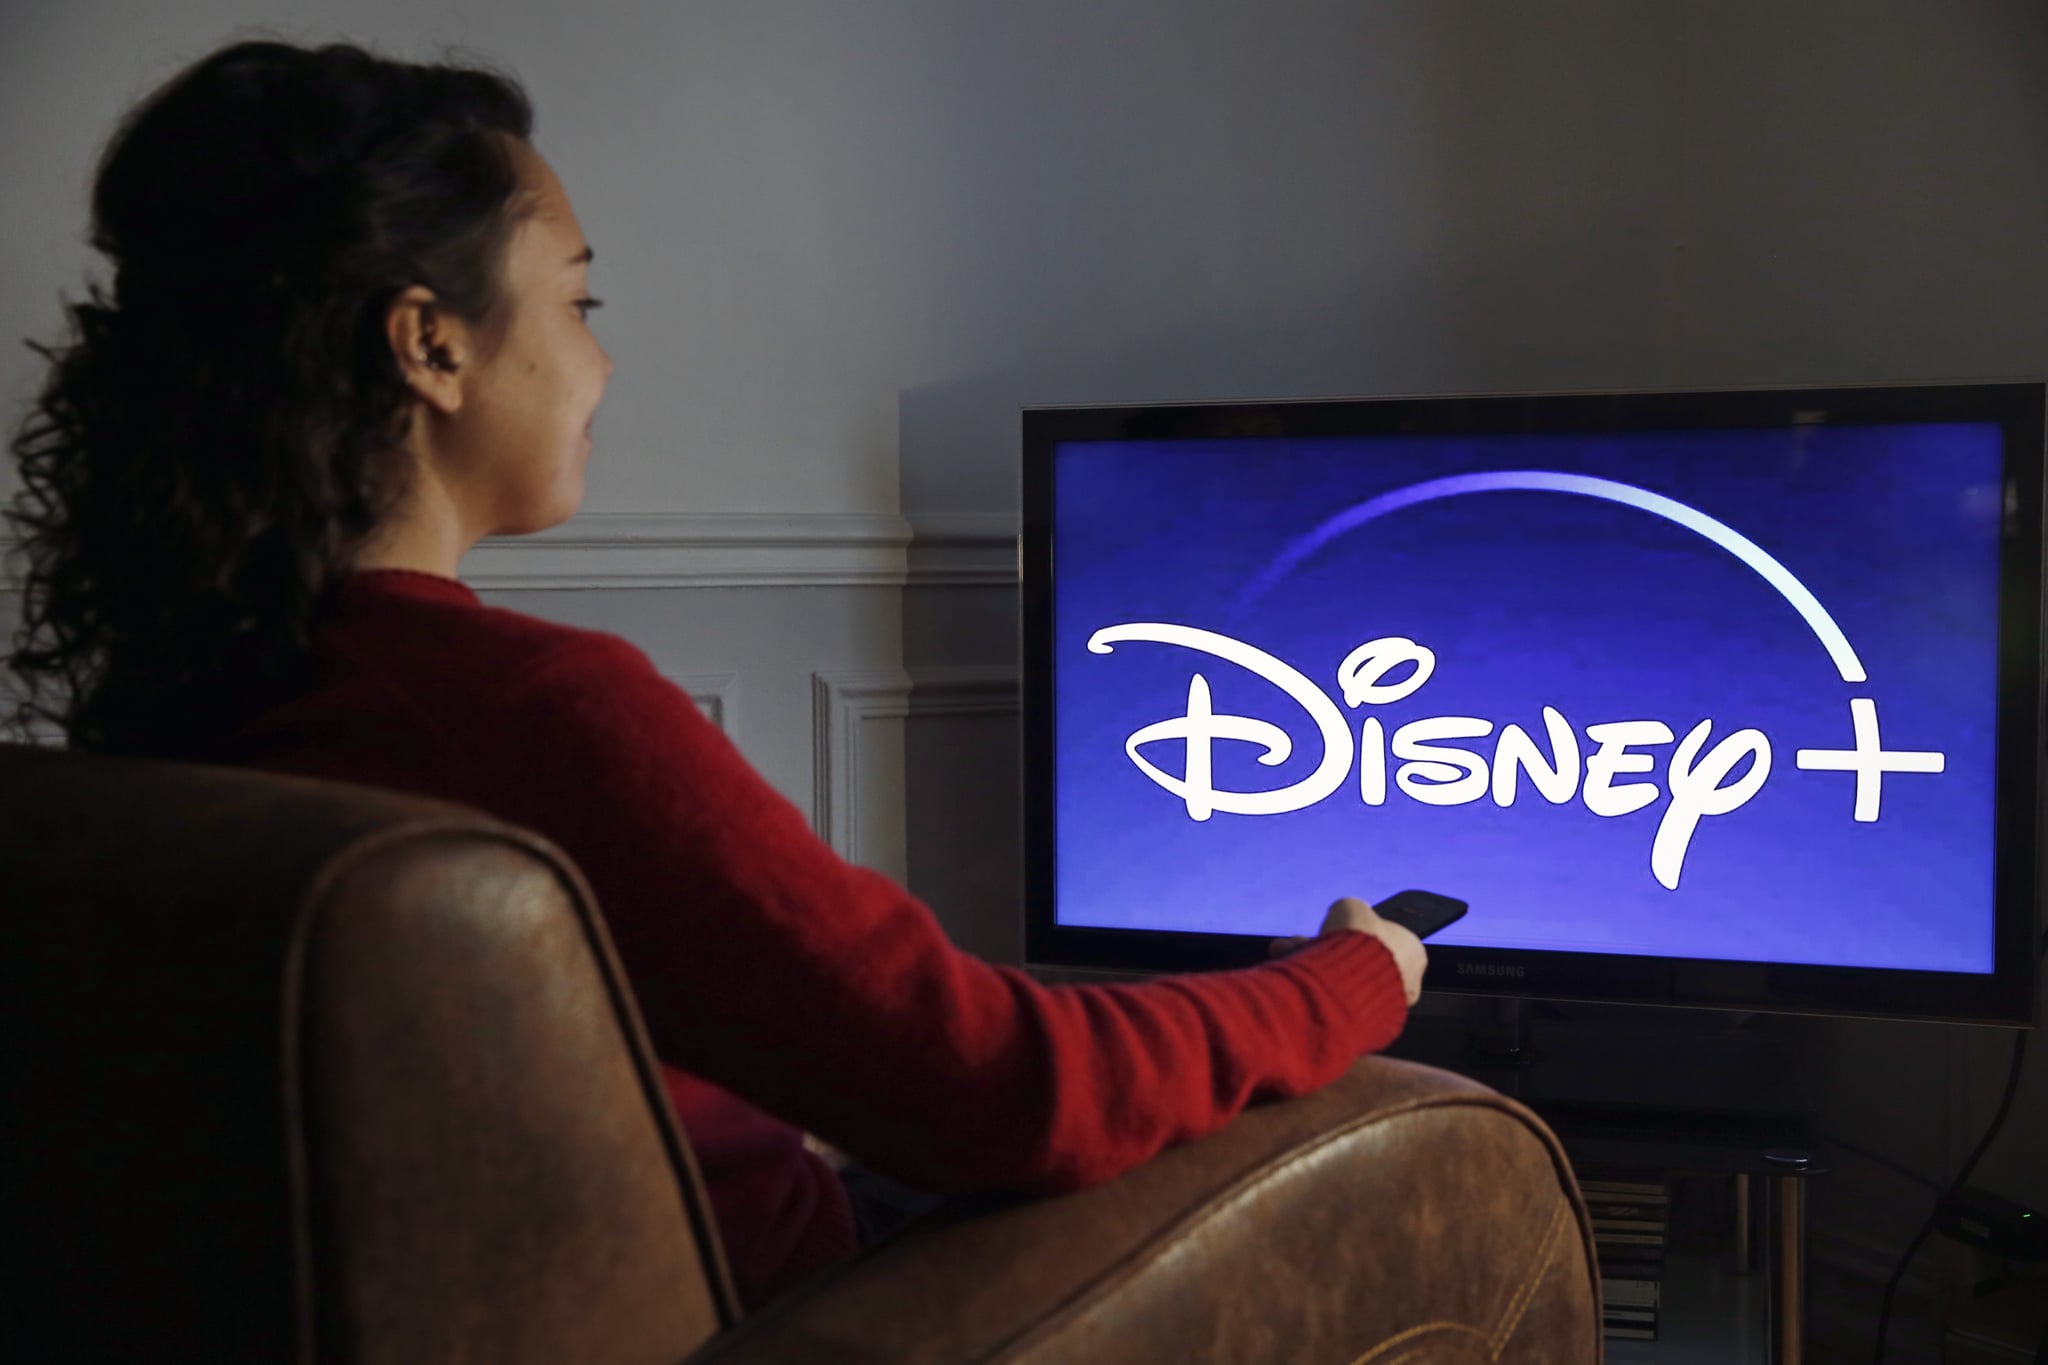 PARIS, FRANCE - DECEMBER 26: In this photo illustration, the Disney + logo is displayed on the screen of a TV on December 26, 2019 in Paris, France. The Walt Disney Company launched its Disney + Streaming Service (Svod) in the United States on November 12, 2019. A month after its launch, Disney Plus has registered 24 million subscribers in the United States, which is very much higher than the forecasts and ambitions of the group, which targeted 20 million subscribers worldwide in 2020.  (Photo by Chesnot/Getty Images)